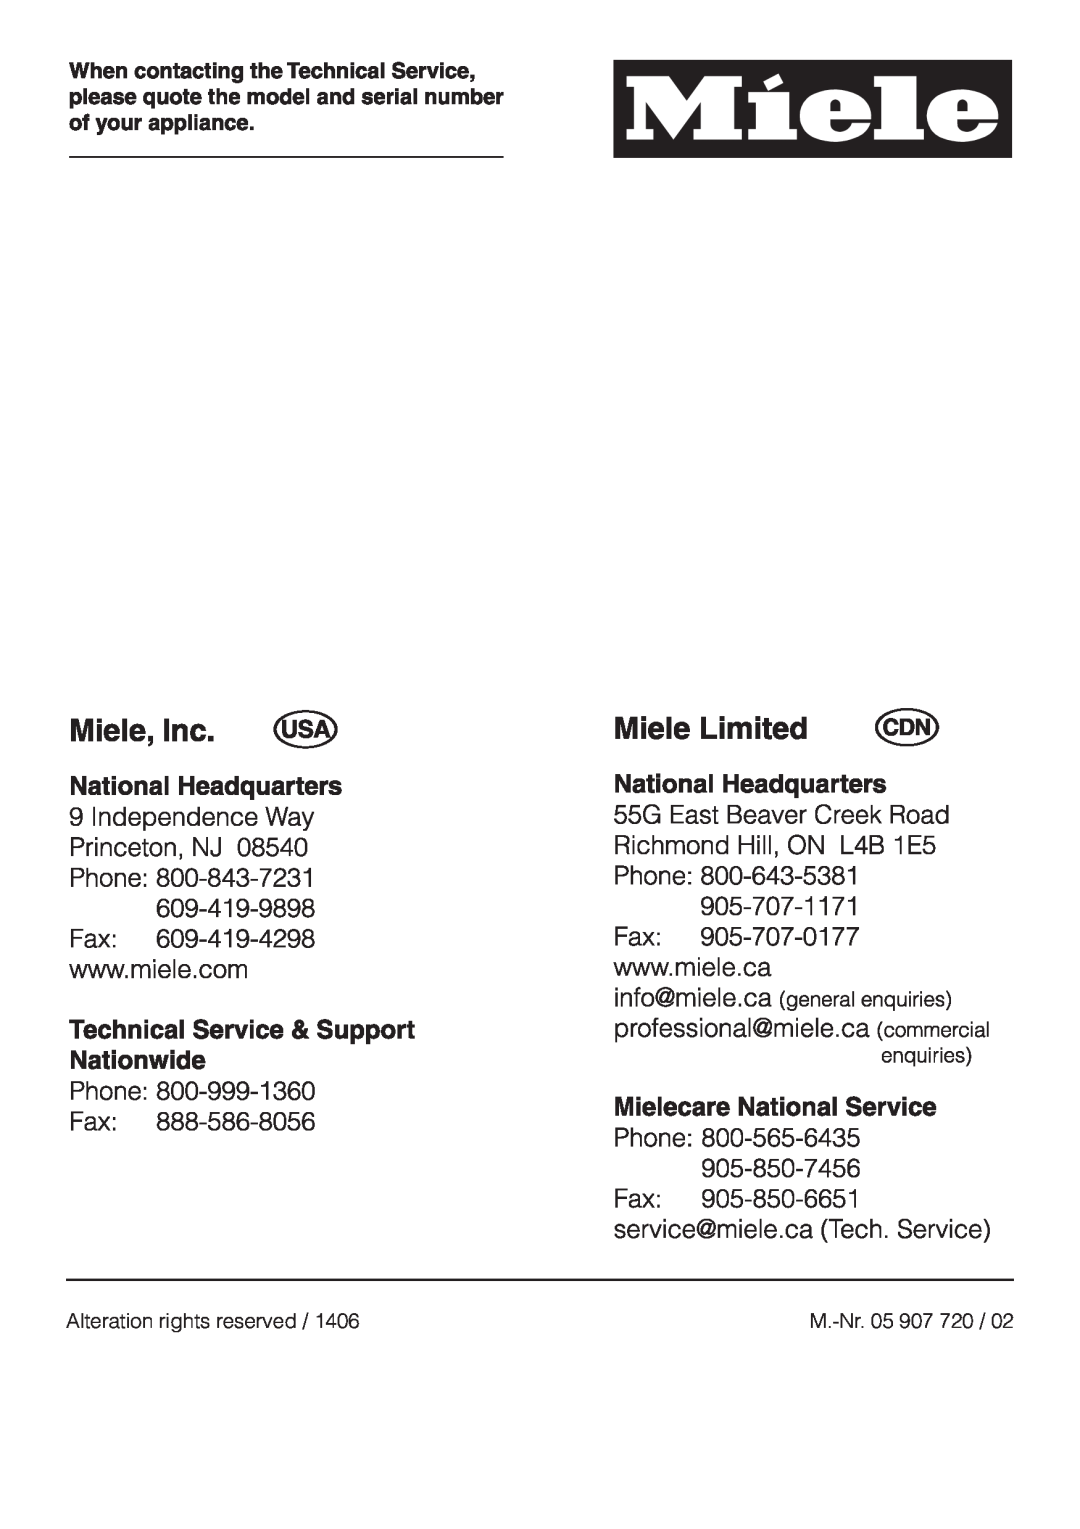 Miele S 318I, S 300I manual Alteration rights reserved, M.-Nr.05 907 